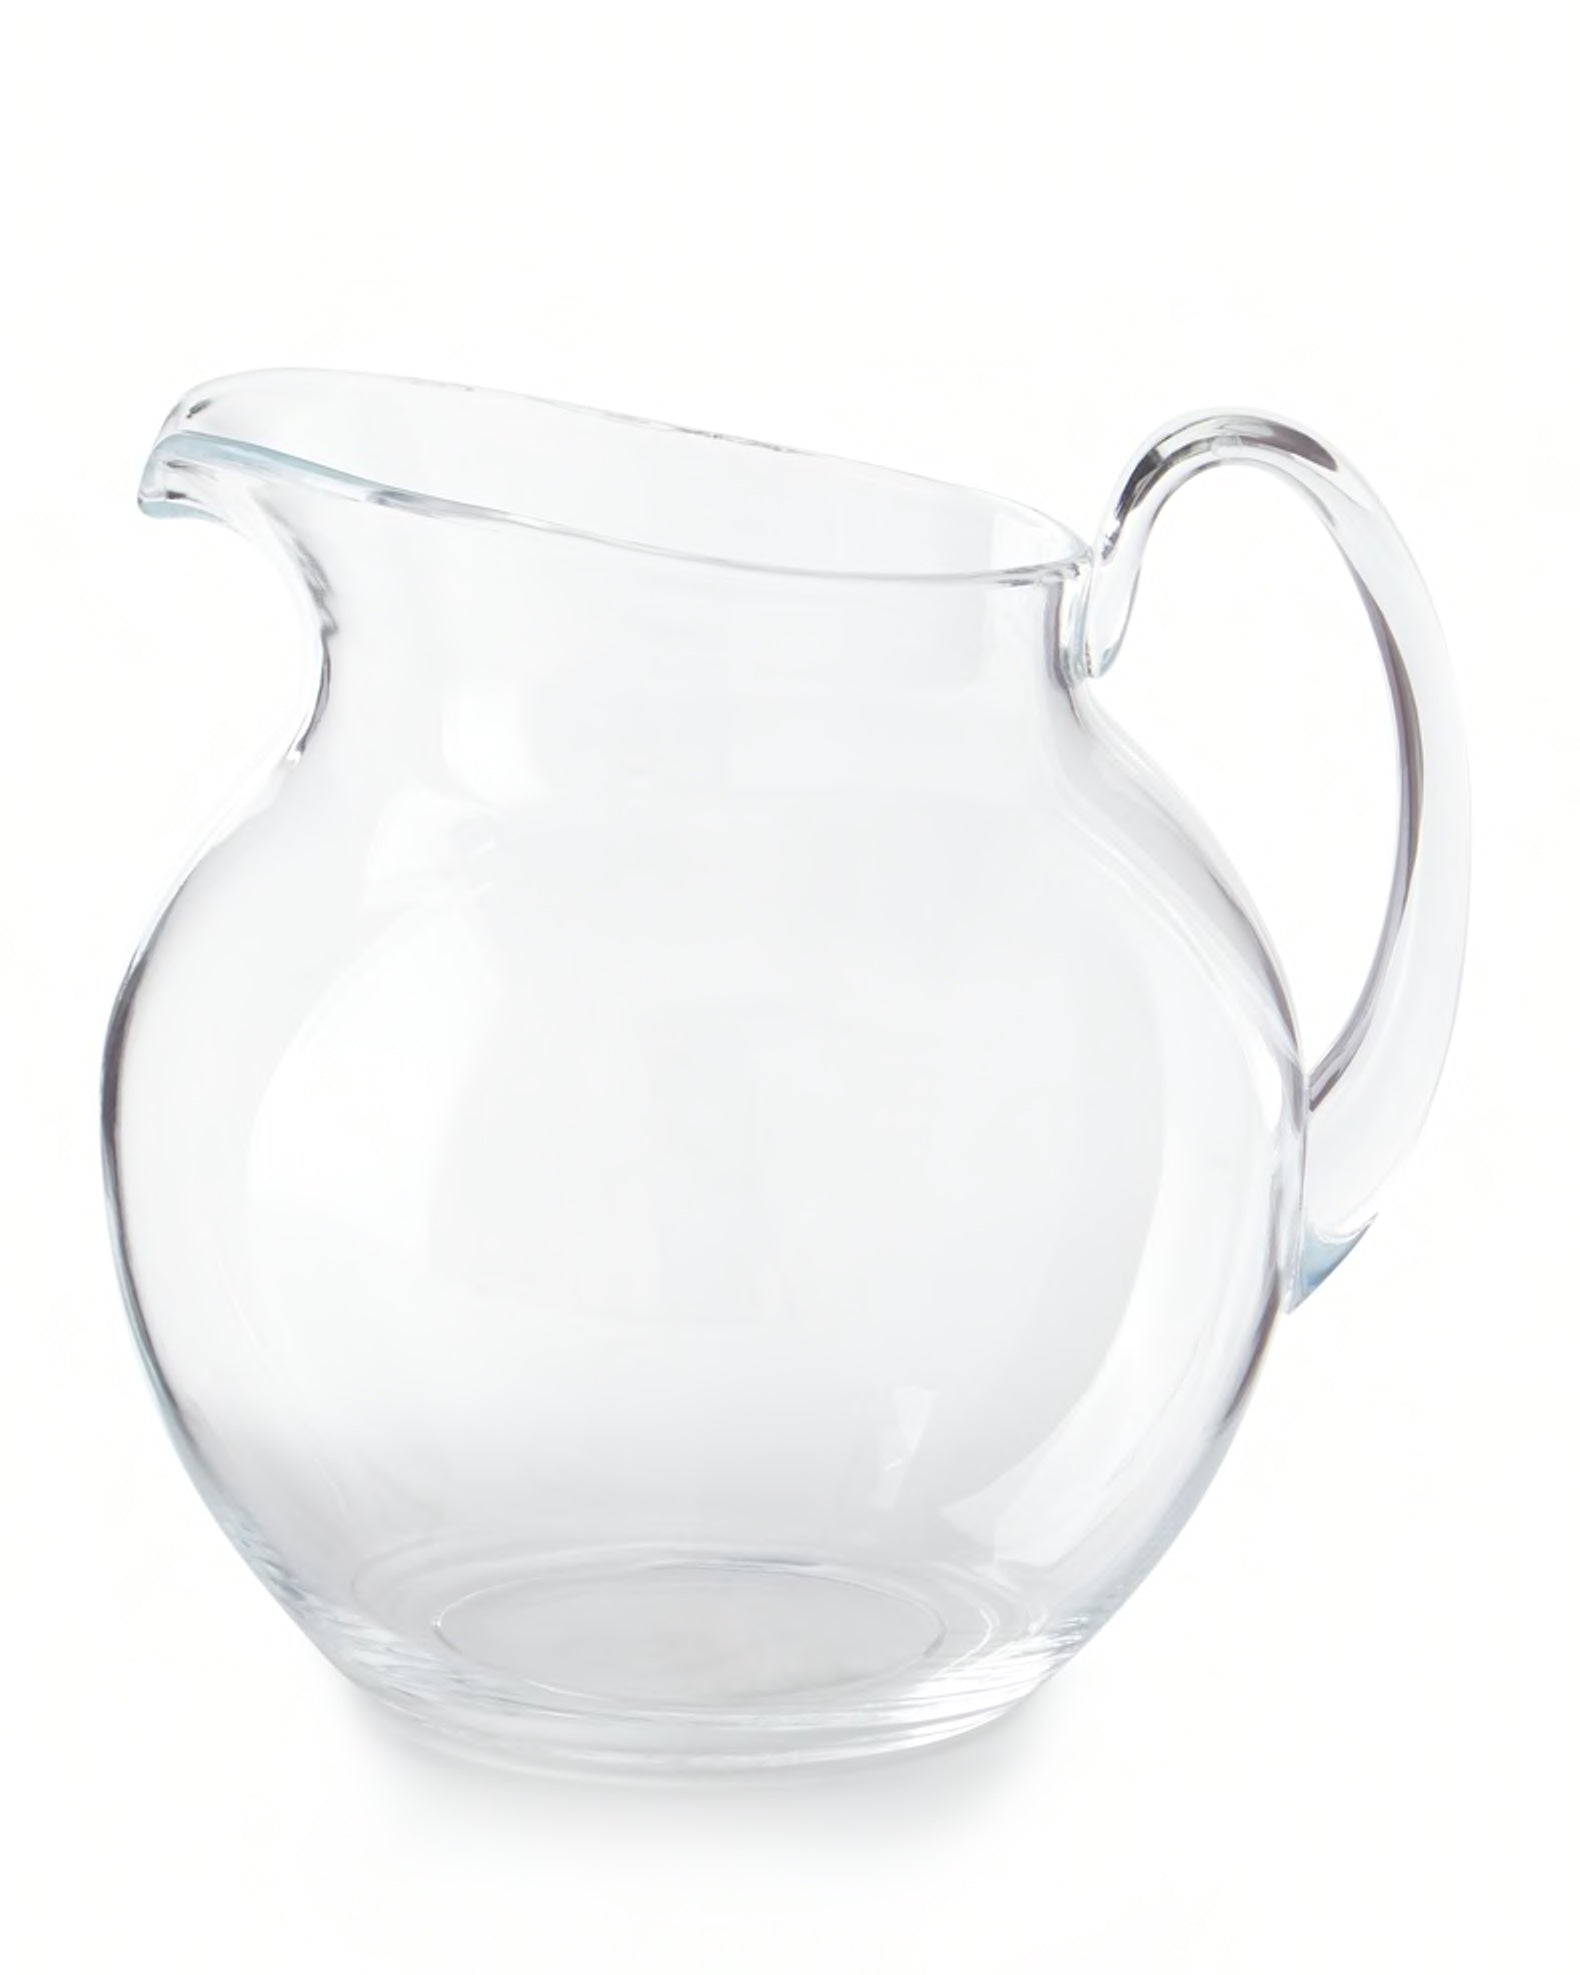 Mariposa Clear Pineapple Texture Large Pitcher